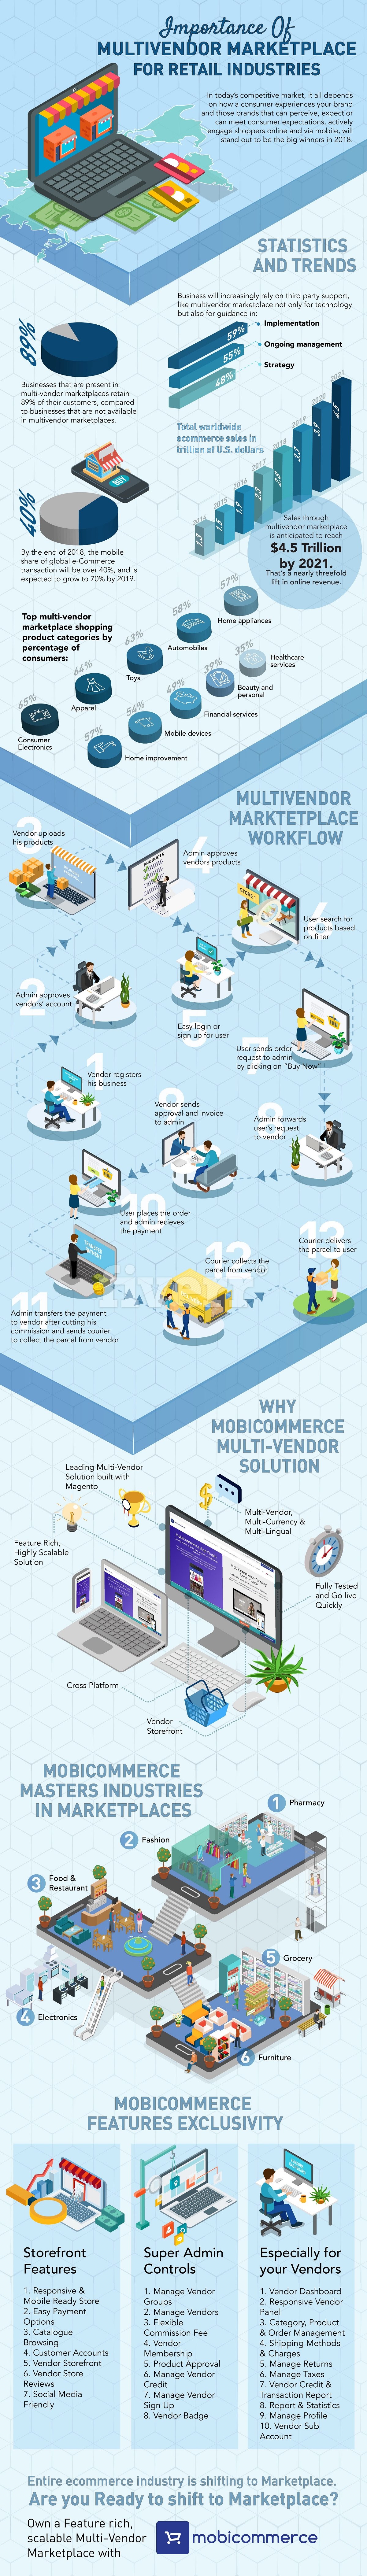 Importance of Multivendor Marketplace for Retail Industries #Infographic